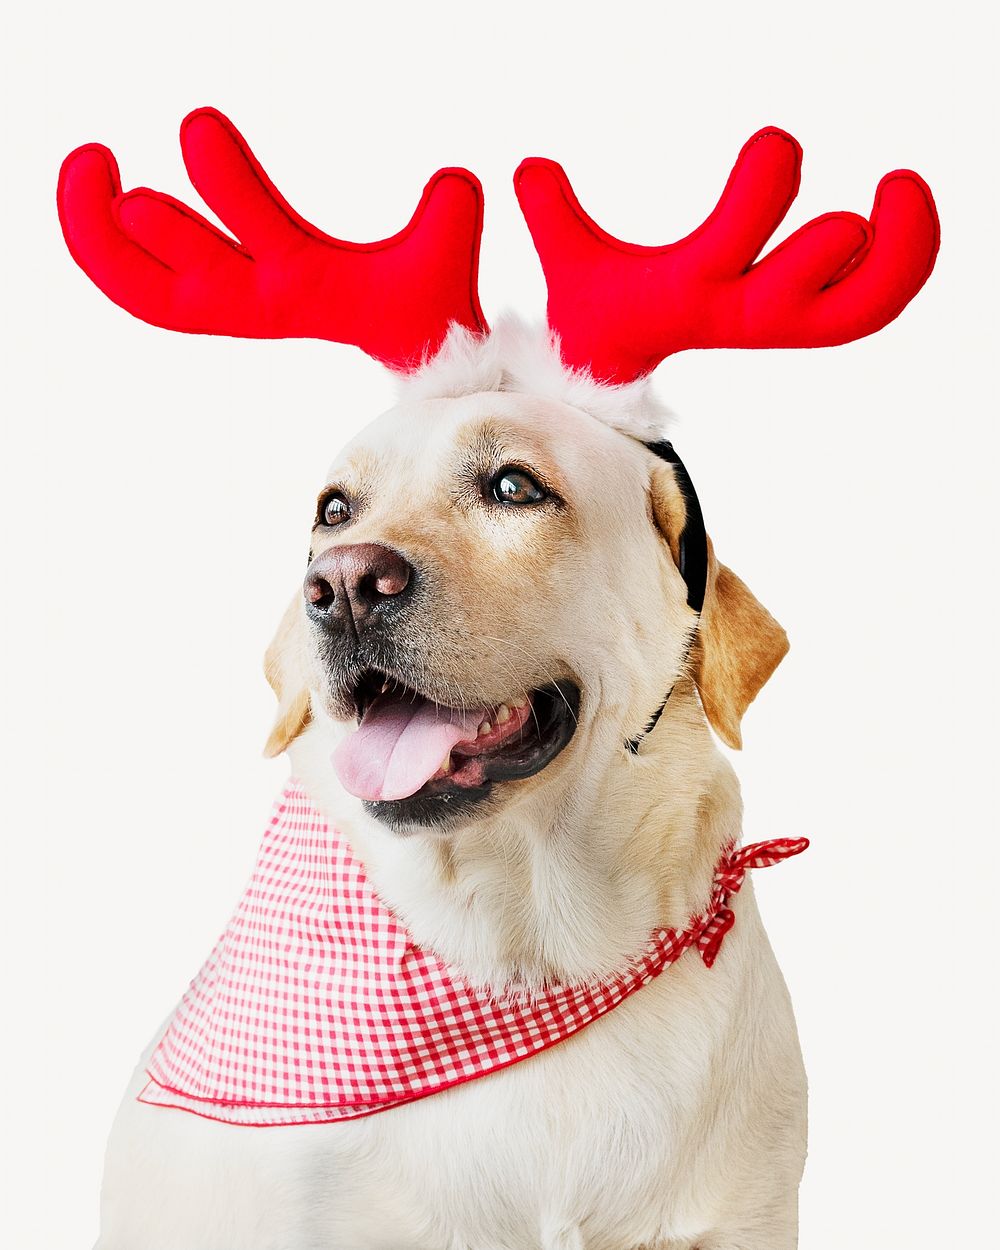 Christmas Labrador Retriever wearing antlers isolated image